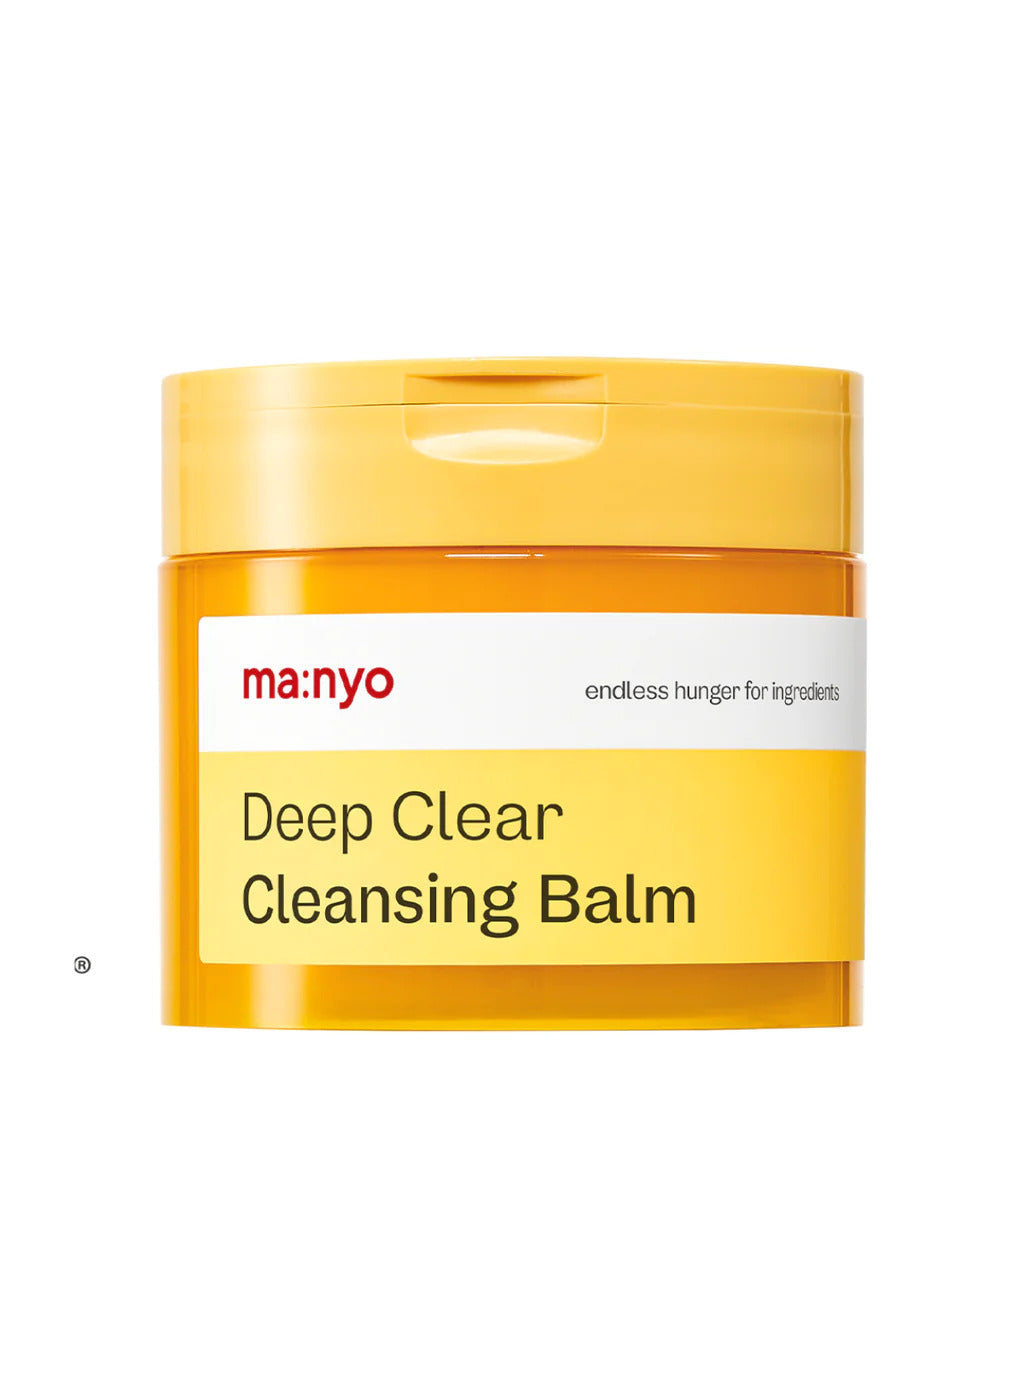 Manyo Factory Deep Clear Cleansing Balm